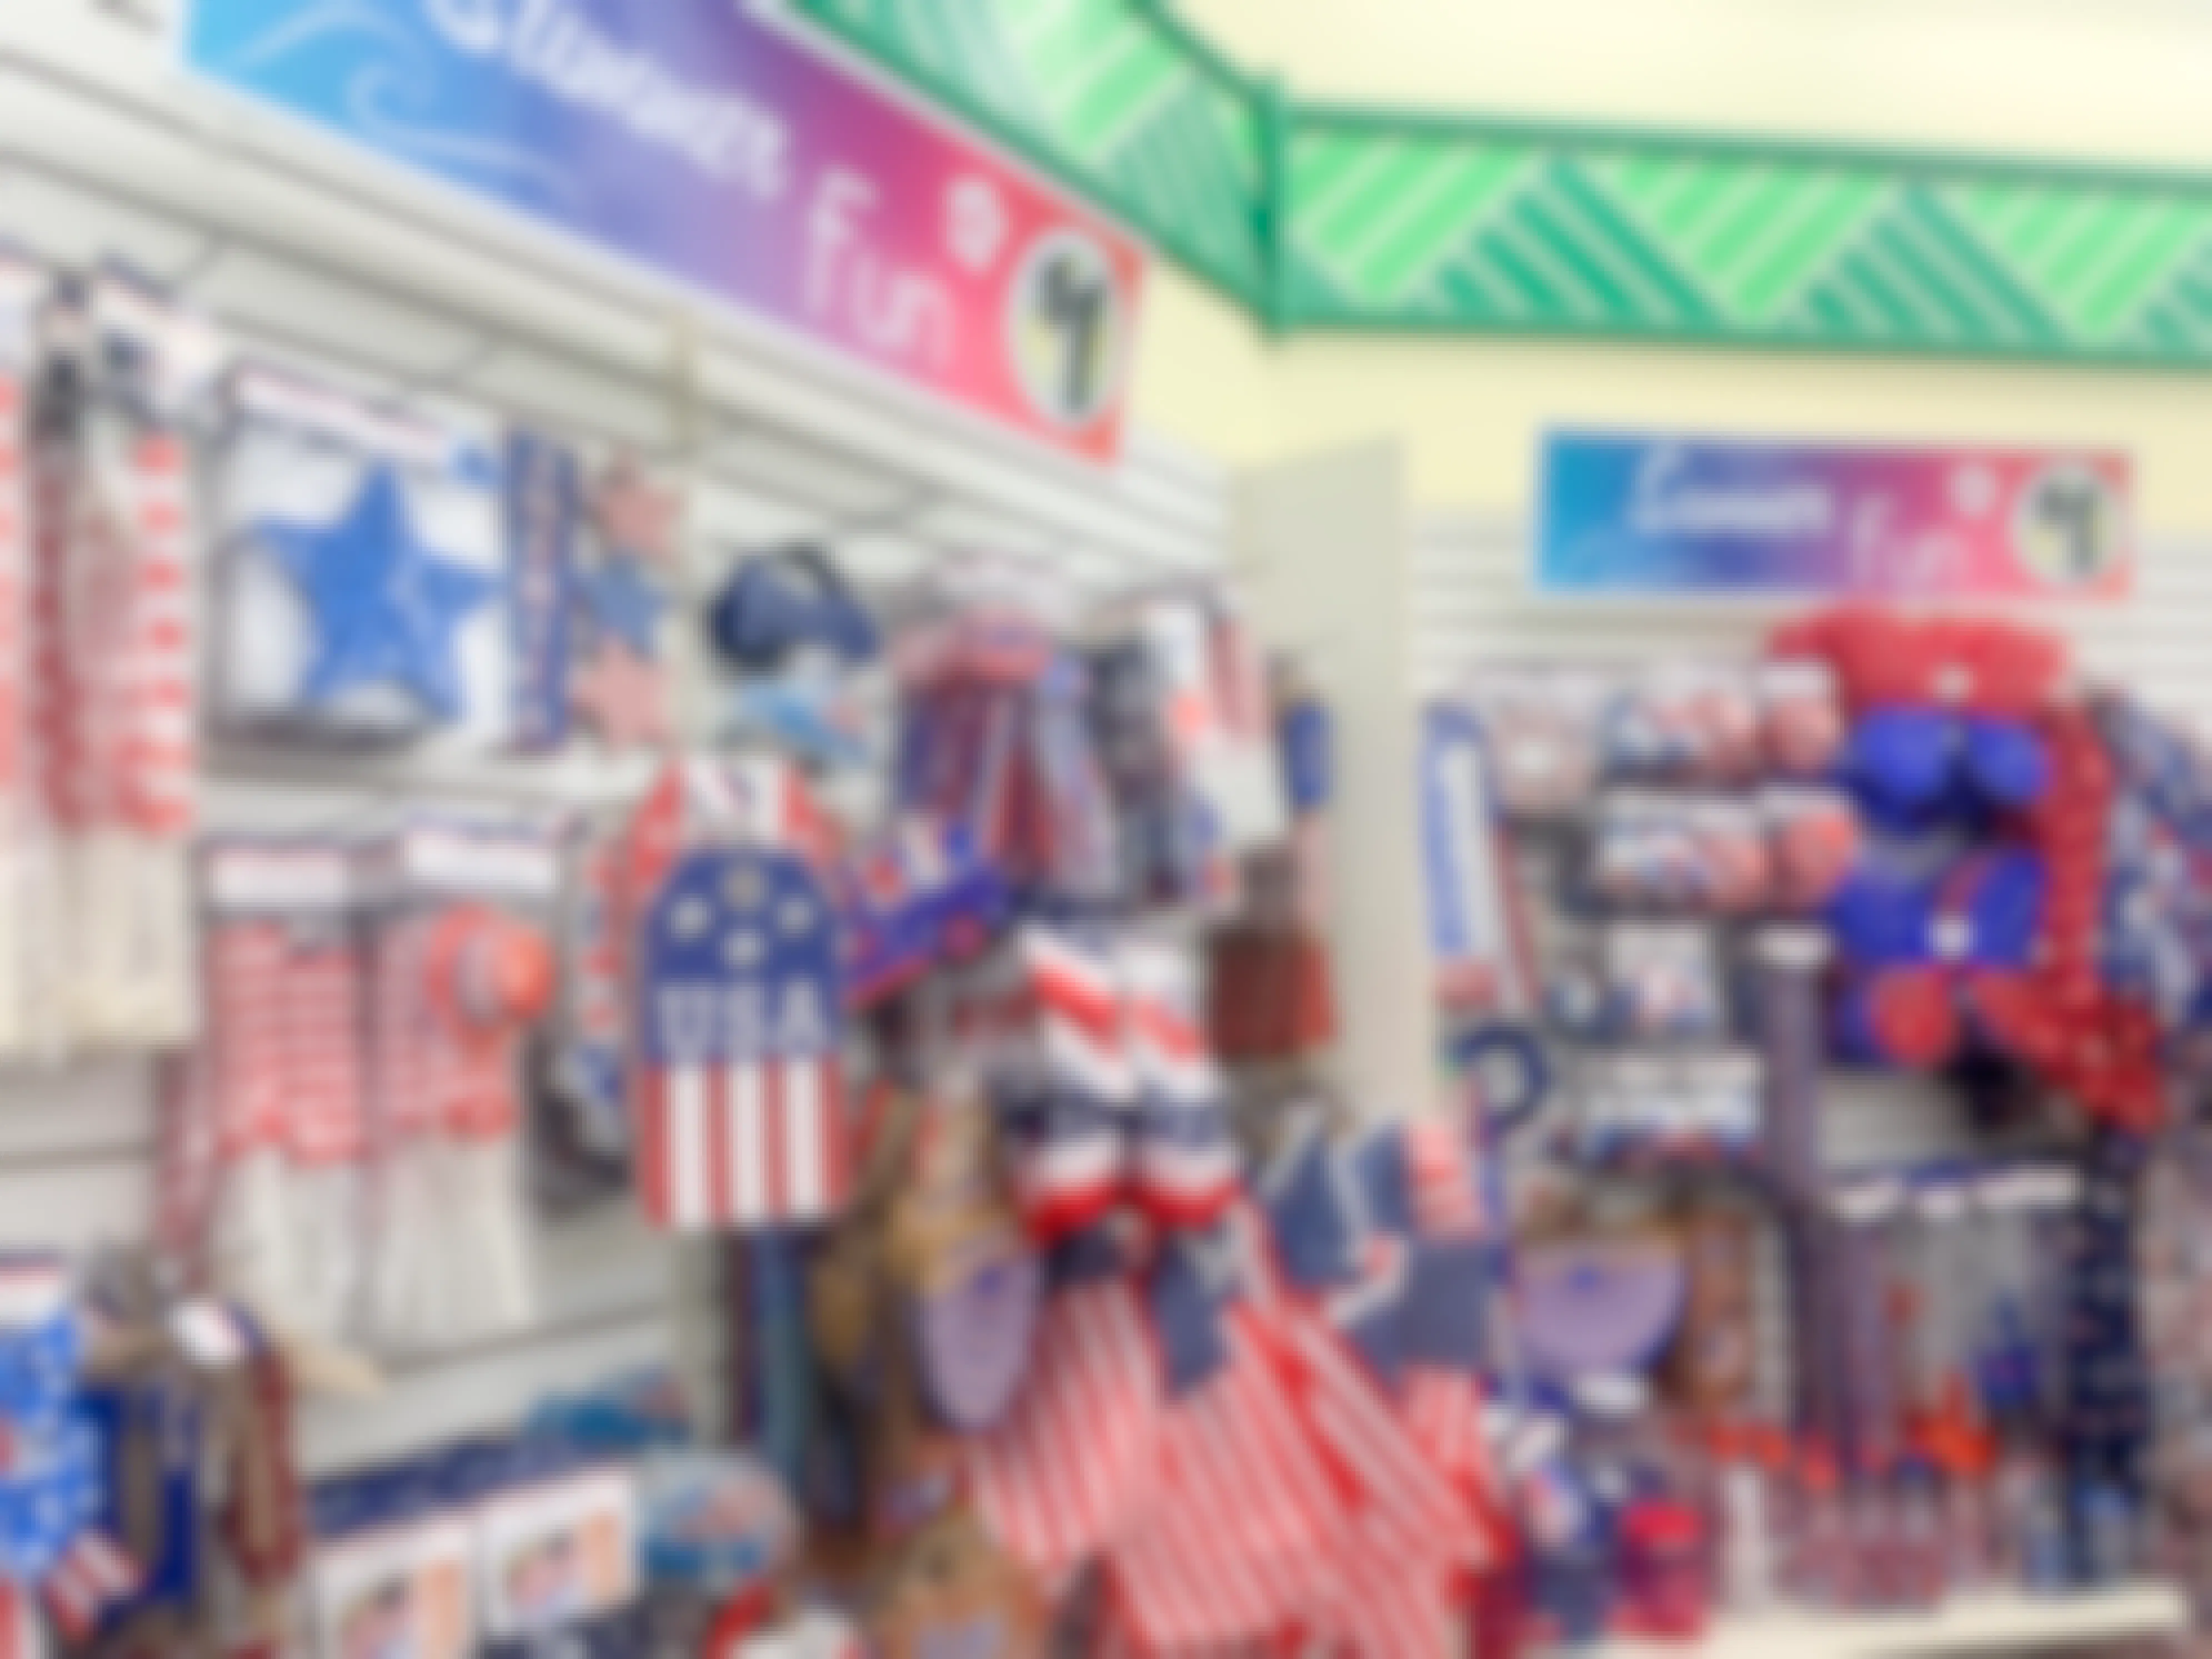 4th of July decorations at the dollar tree